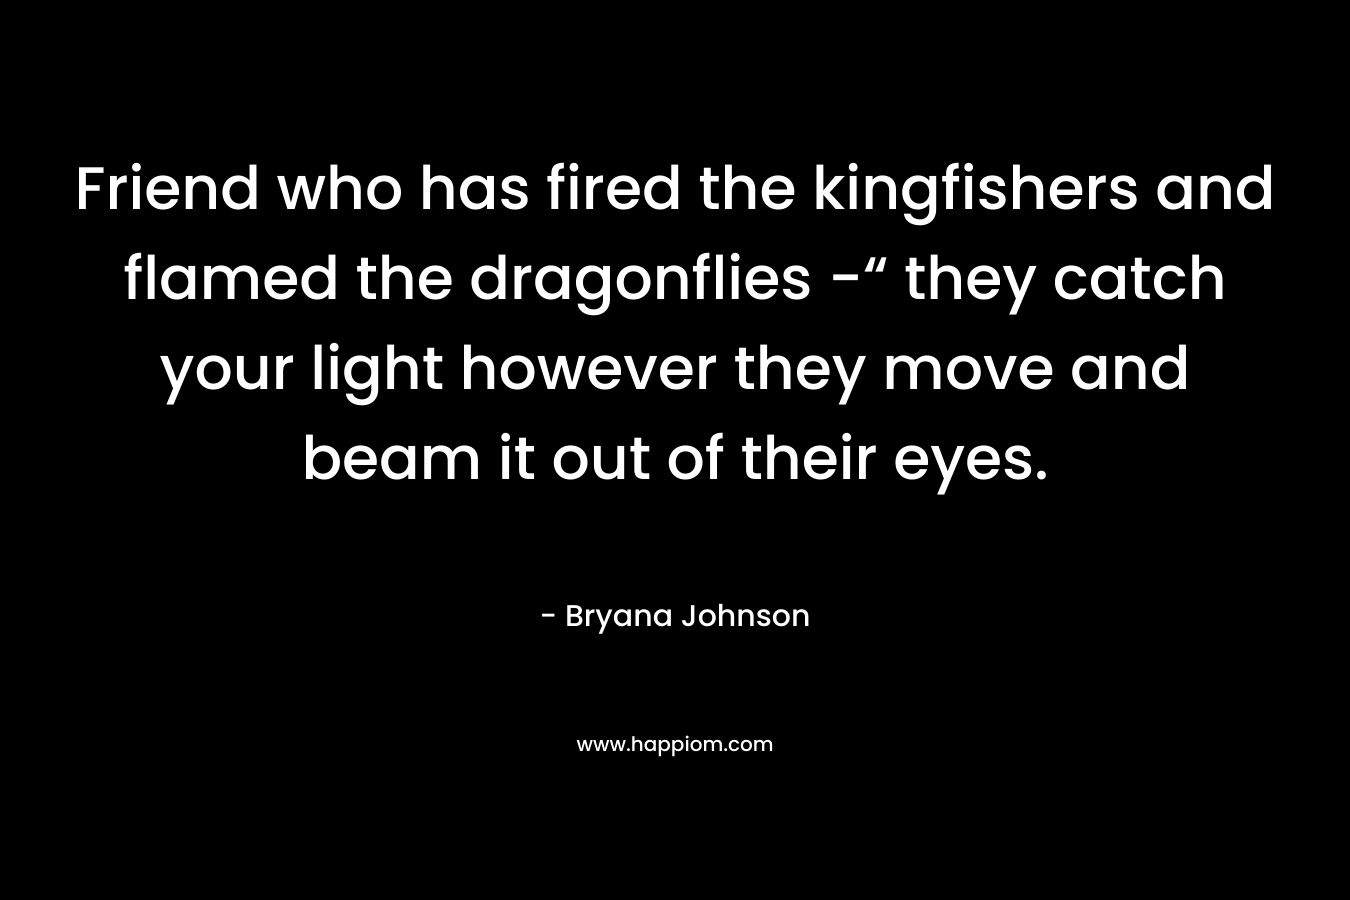 Friend who has fired the kingfishers and flamed the dragonflies -“ they catch your light however they move and beam it out of their eyes.